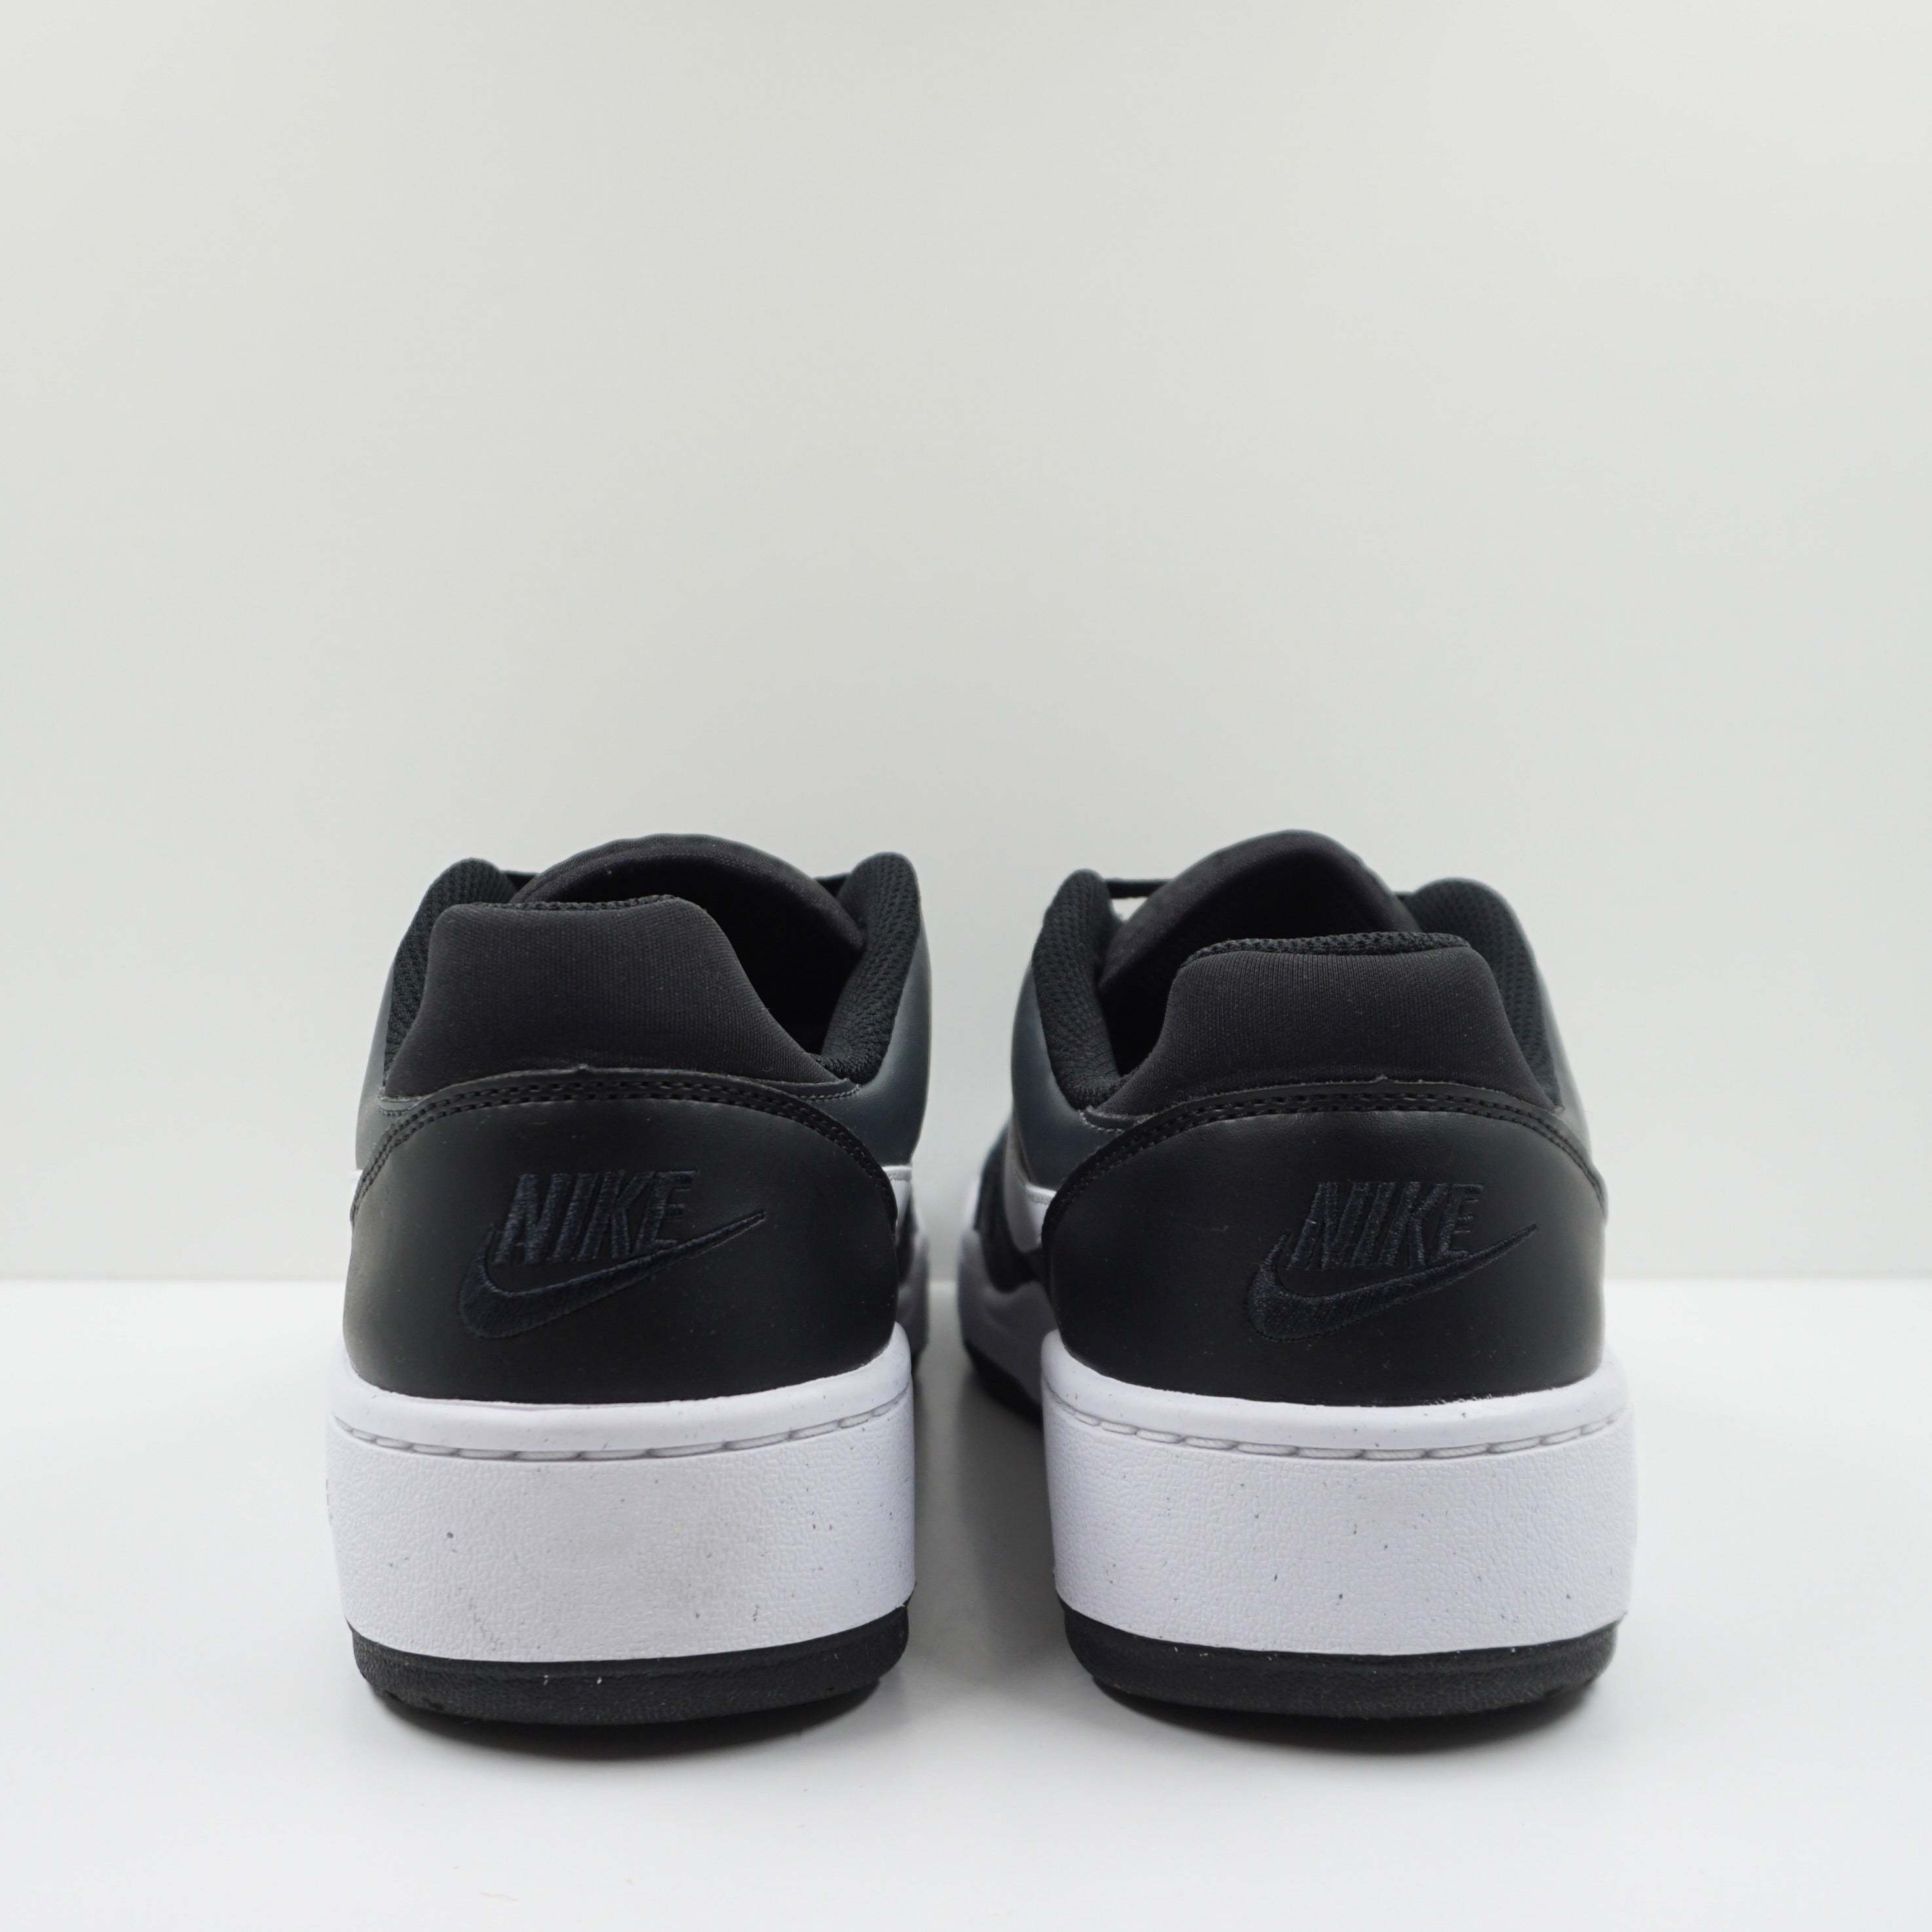 Nike Full Force Low Anthracite